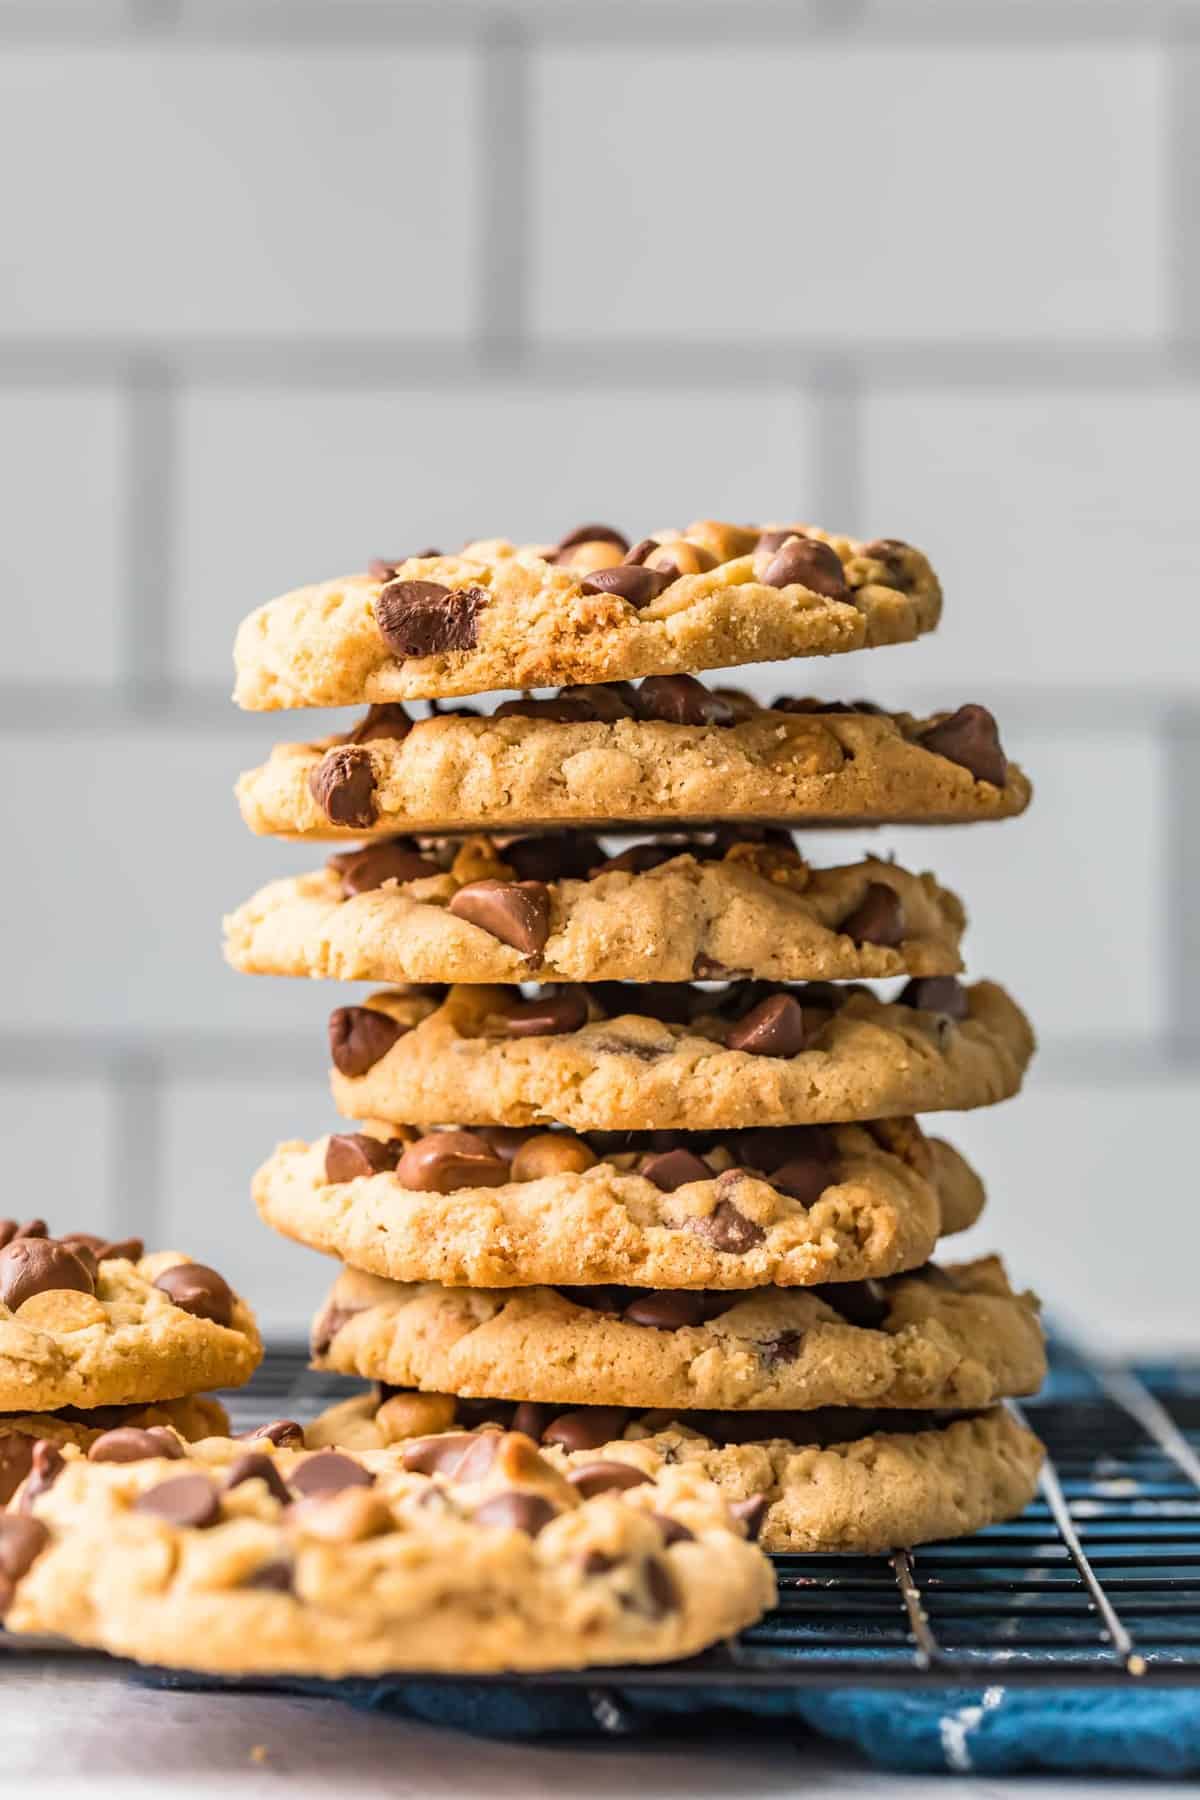 Giant cookies stacked on top of each other